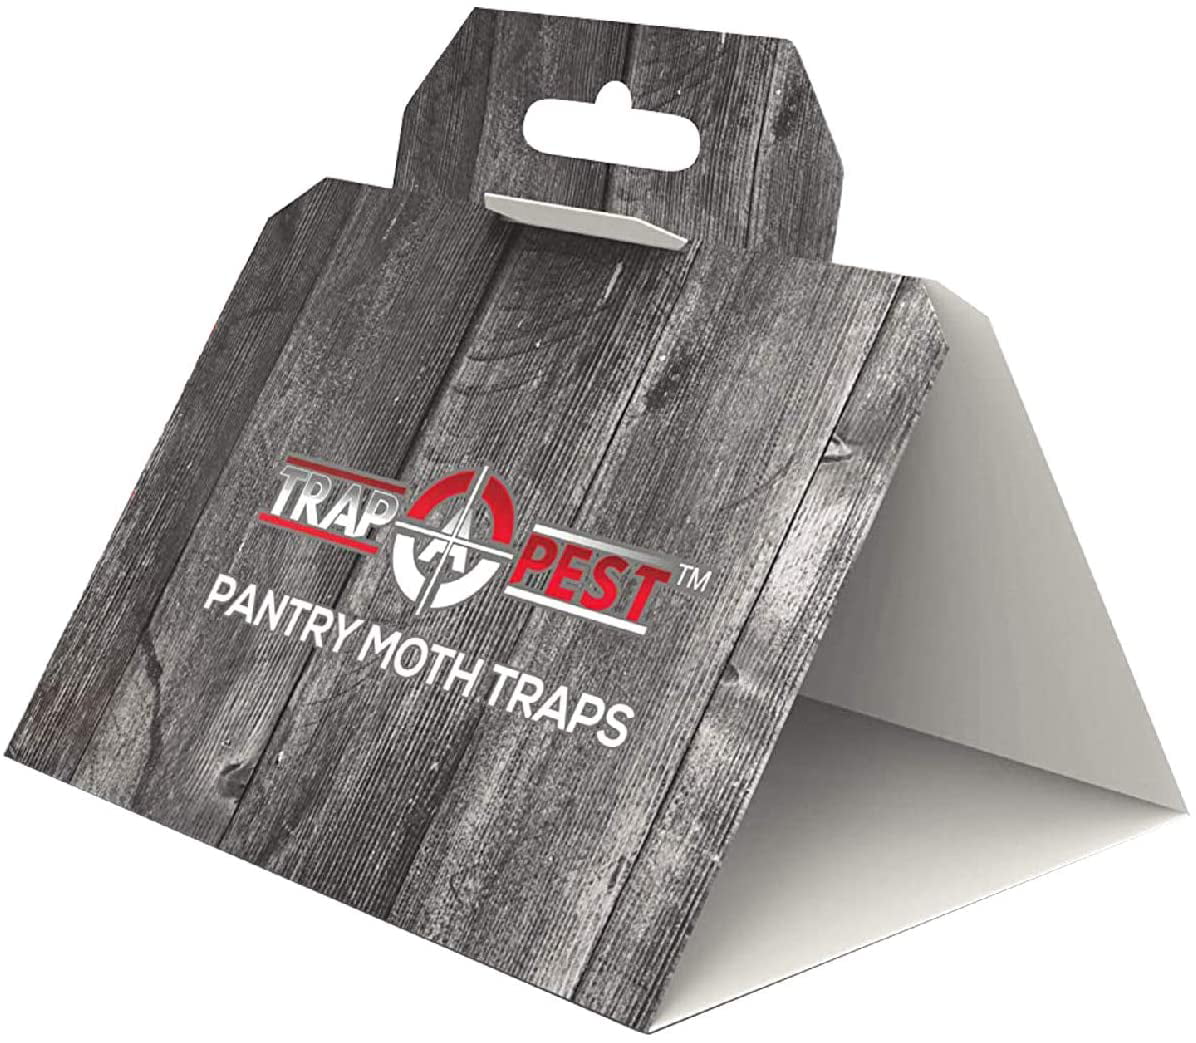  MothMag Pantry Moth Glue Traps for House Pantry, Non-Toxic Pantry  Moth Killer for Food and Cupboard Moths, Pantry Moth Trap, Pantry Moth Traps  with Pheromones Prime, 6 Pack : Patio